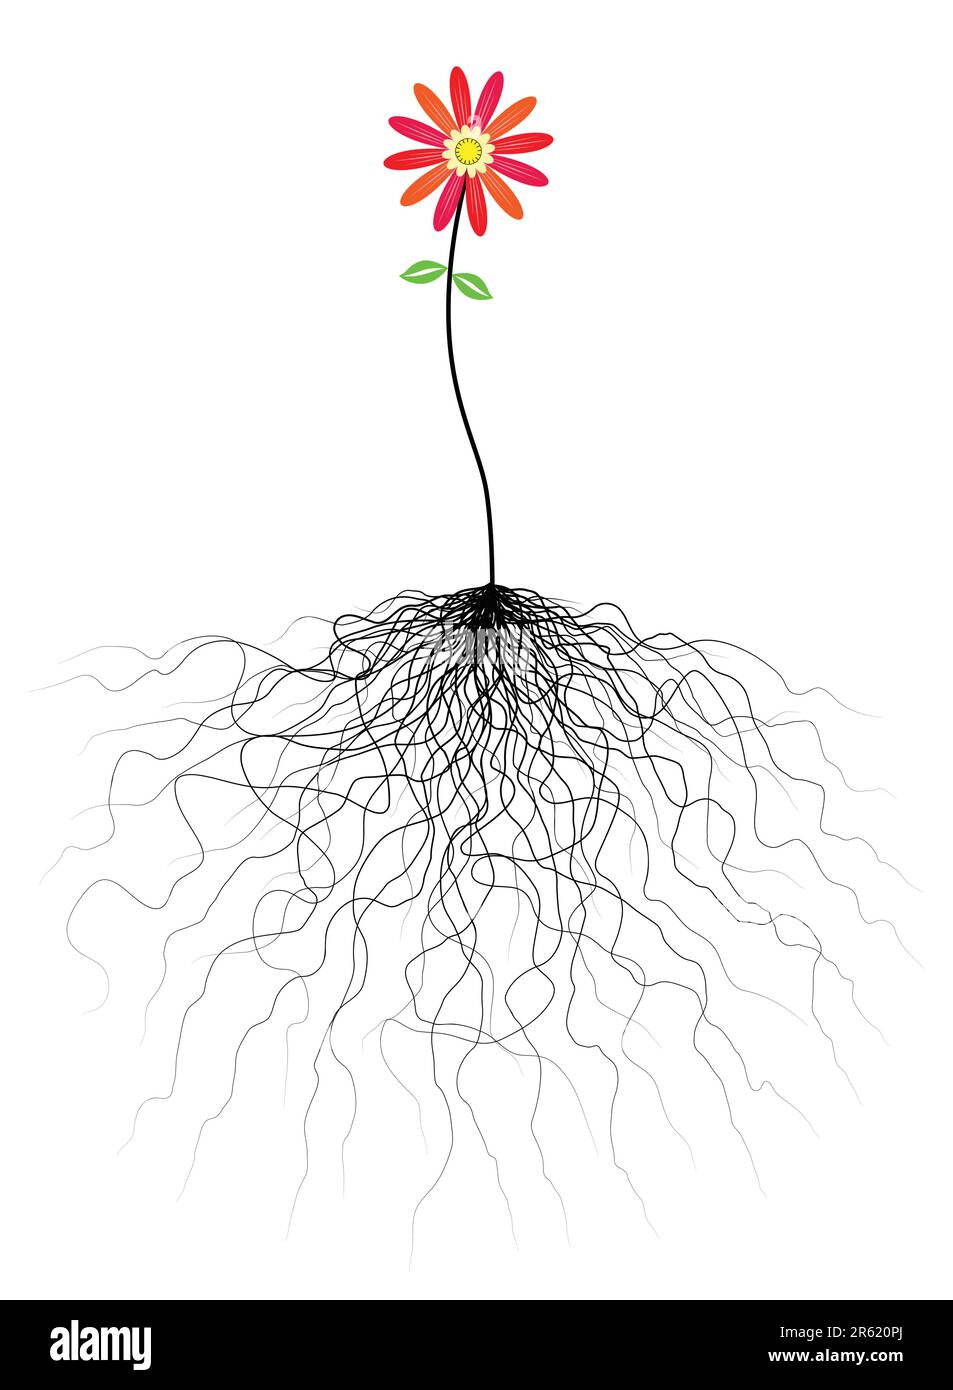 Editable vector flower illustration with tangled roots Stock Vector